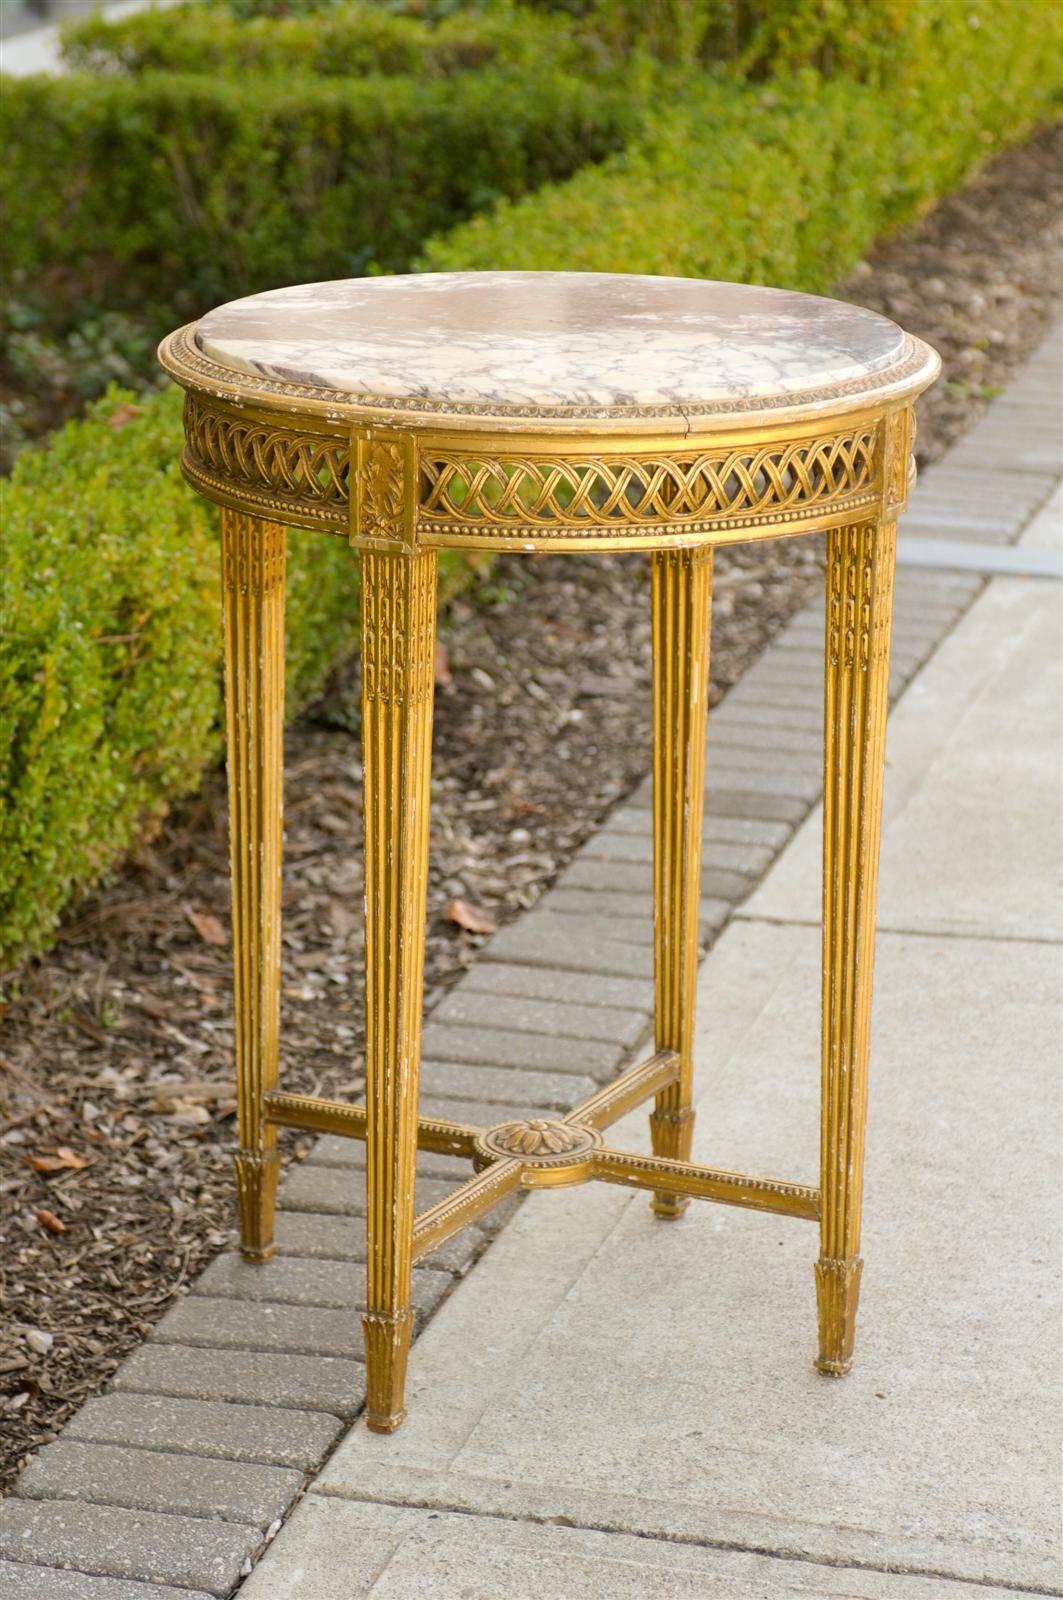 This French Napoléon III guéridon table from the 1870s features a round white and purple veined marble top over a giltwood structure. The lovely egg and dart molding surrounding the marble top sits above an intricately carved apron with a decor